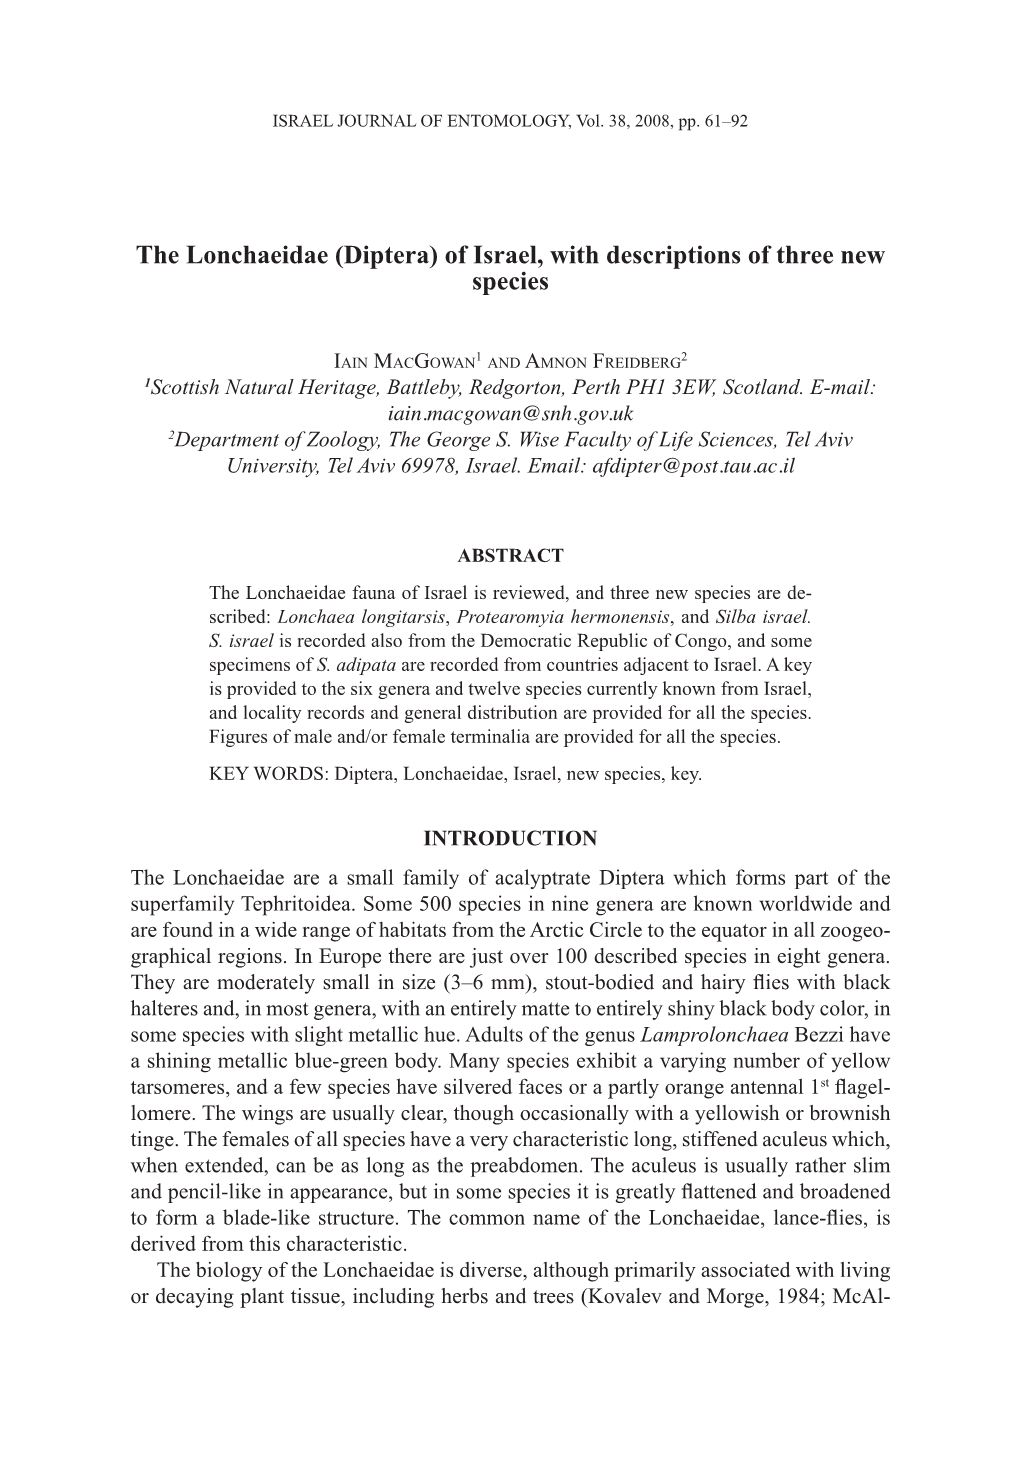 The Lonchaeidae (Diptera) of Israel, with Descriptions of Three New Species